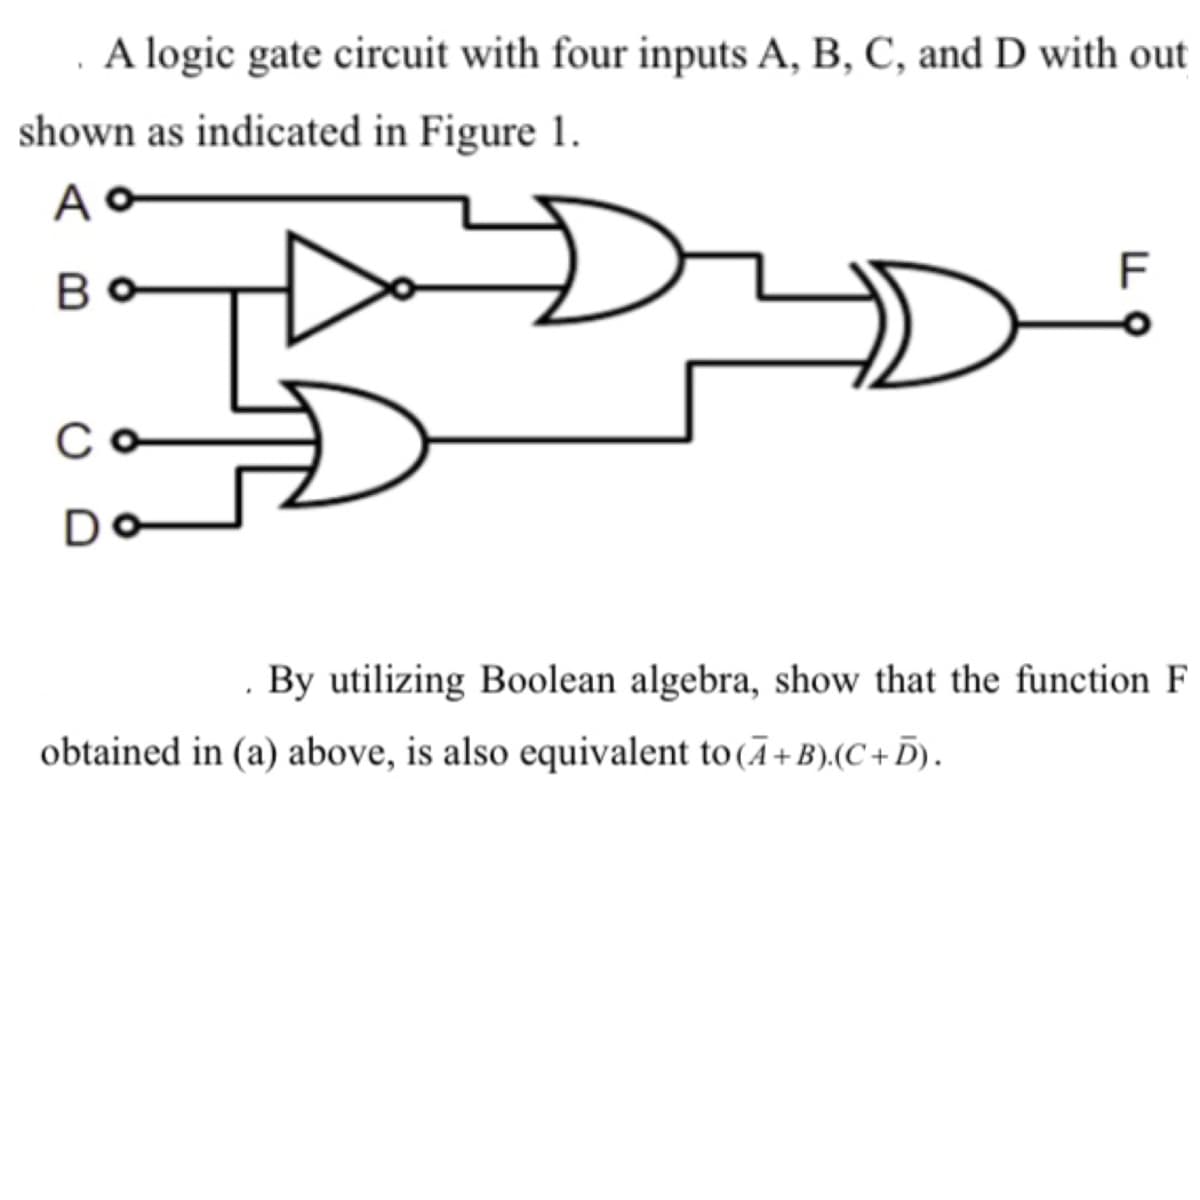 A logic gate circuit with four inputs A, B, C, and D with out
shown as indicated in Figure 1.
Ao
Bo
C
D
TI
F
By utilizing Boolean algebra, show that the function F
obtained in (a) above, is also equivalent to (A+B).(C+D).